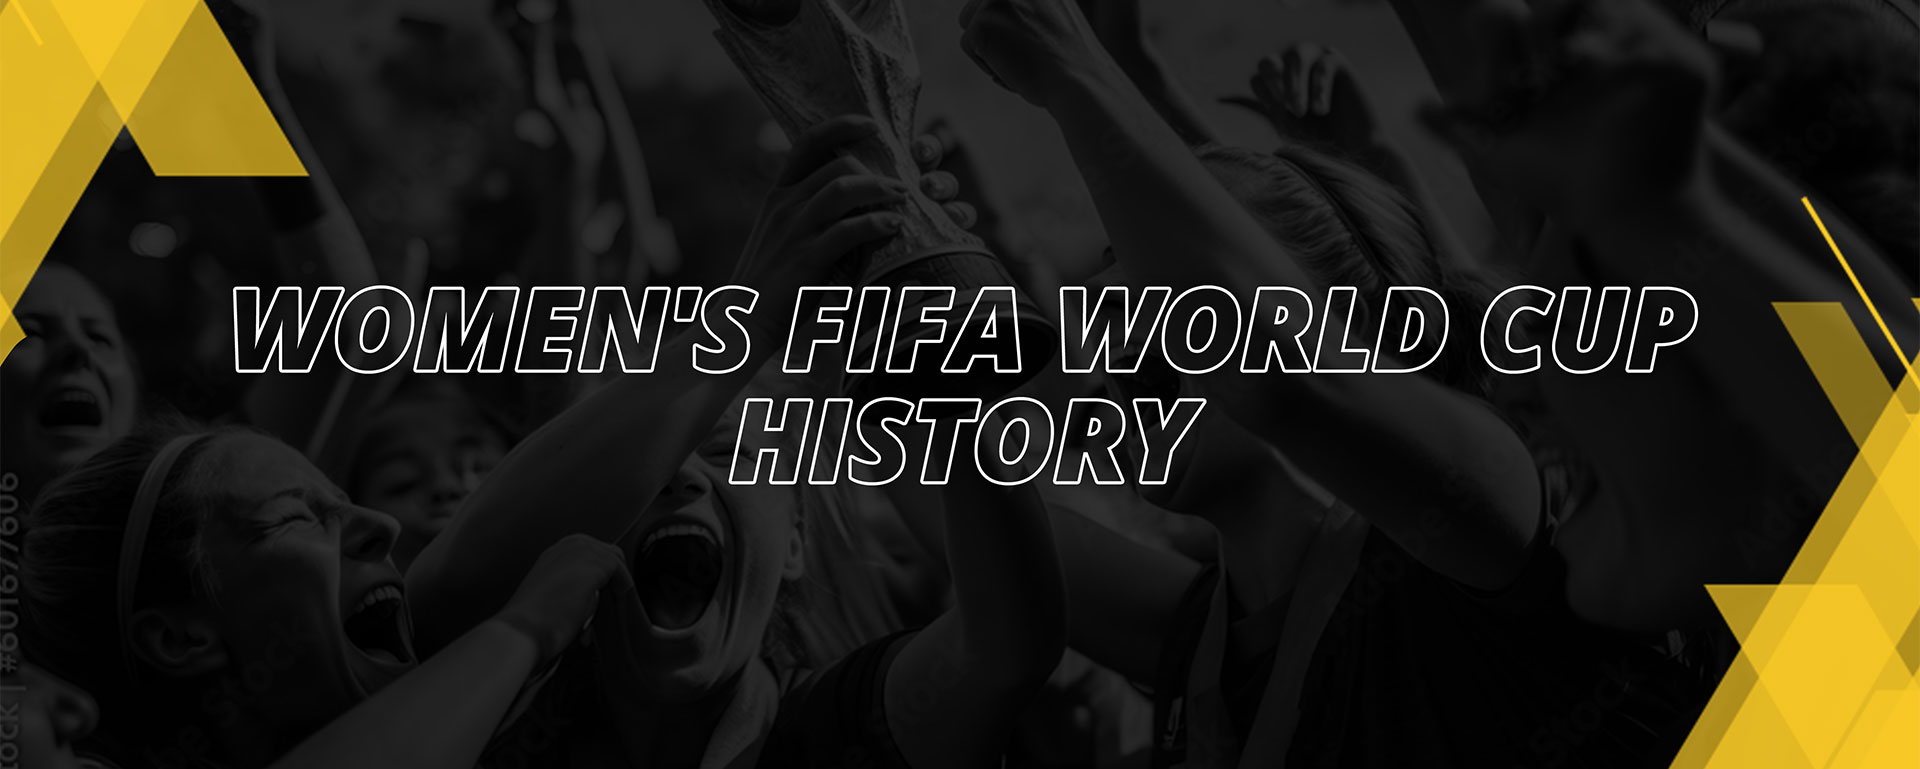 WOMEN’S WORLD CUP HISTORY